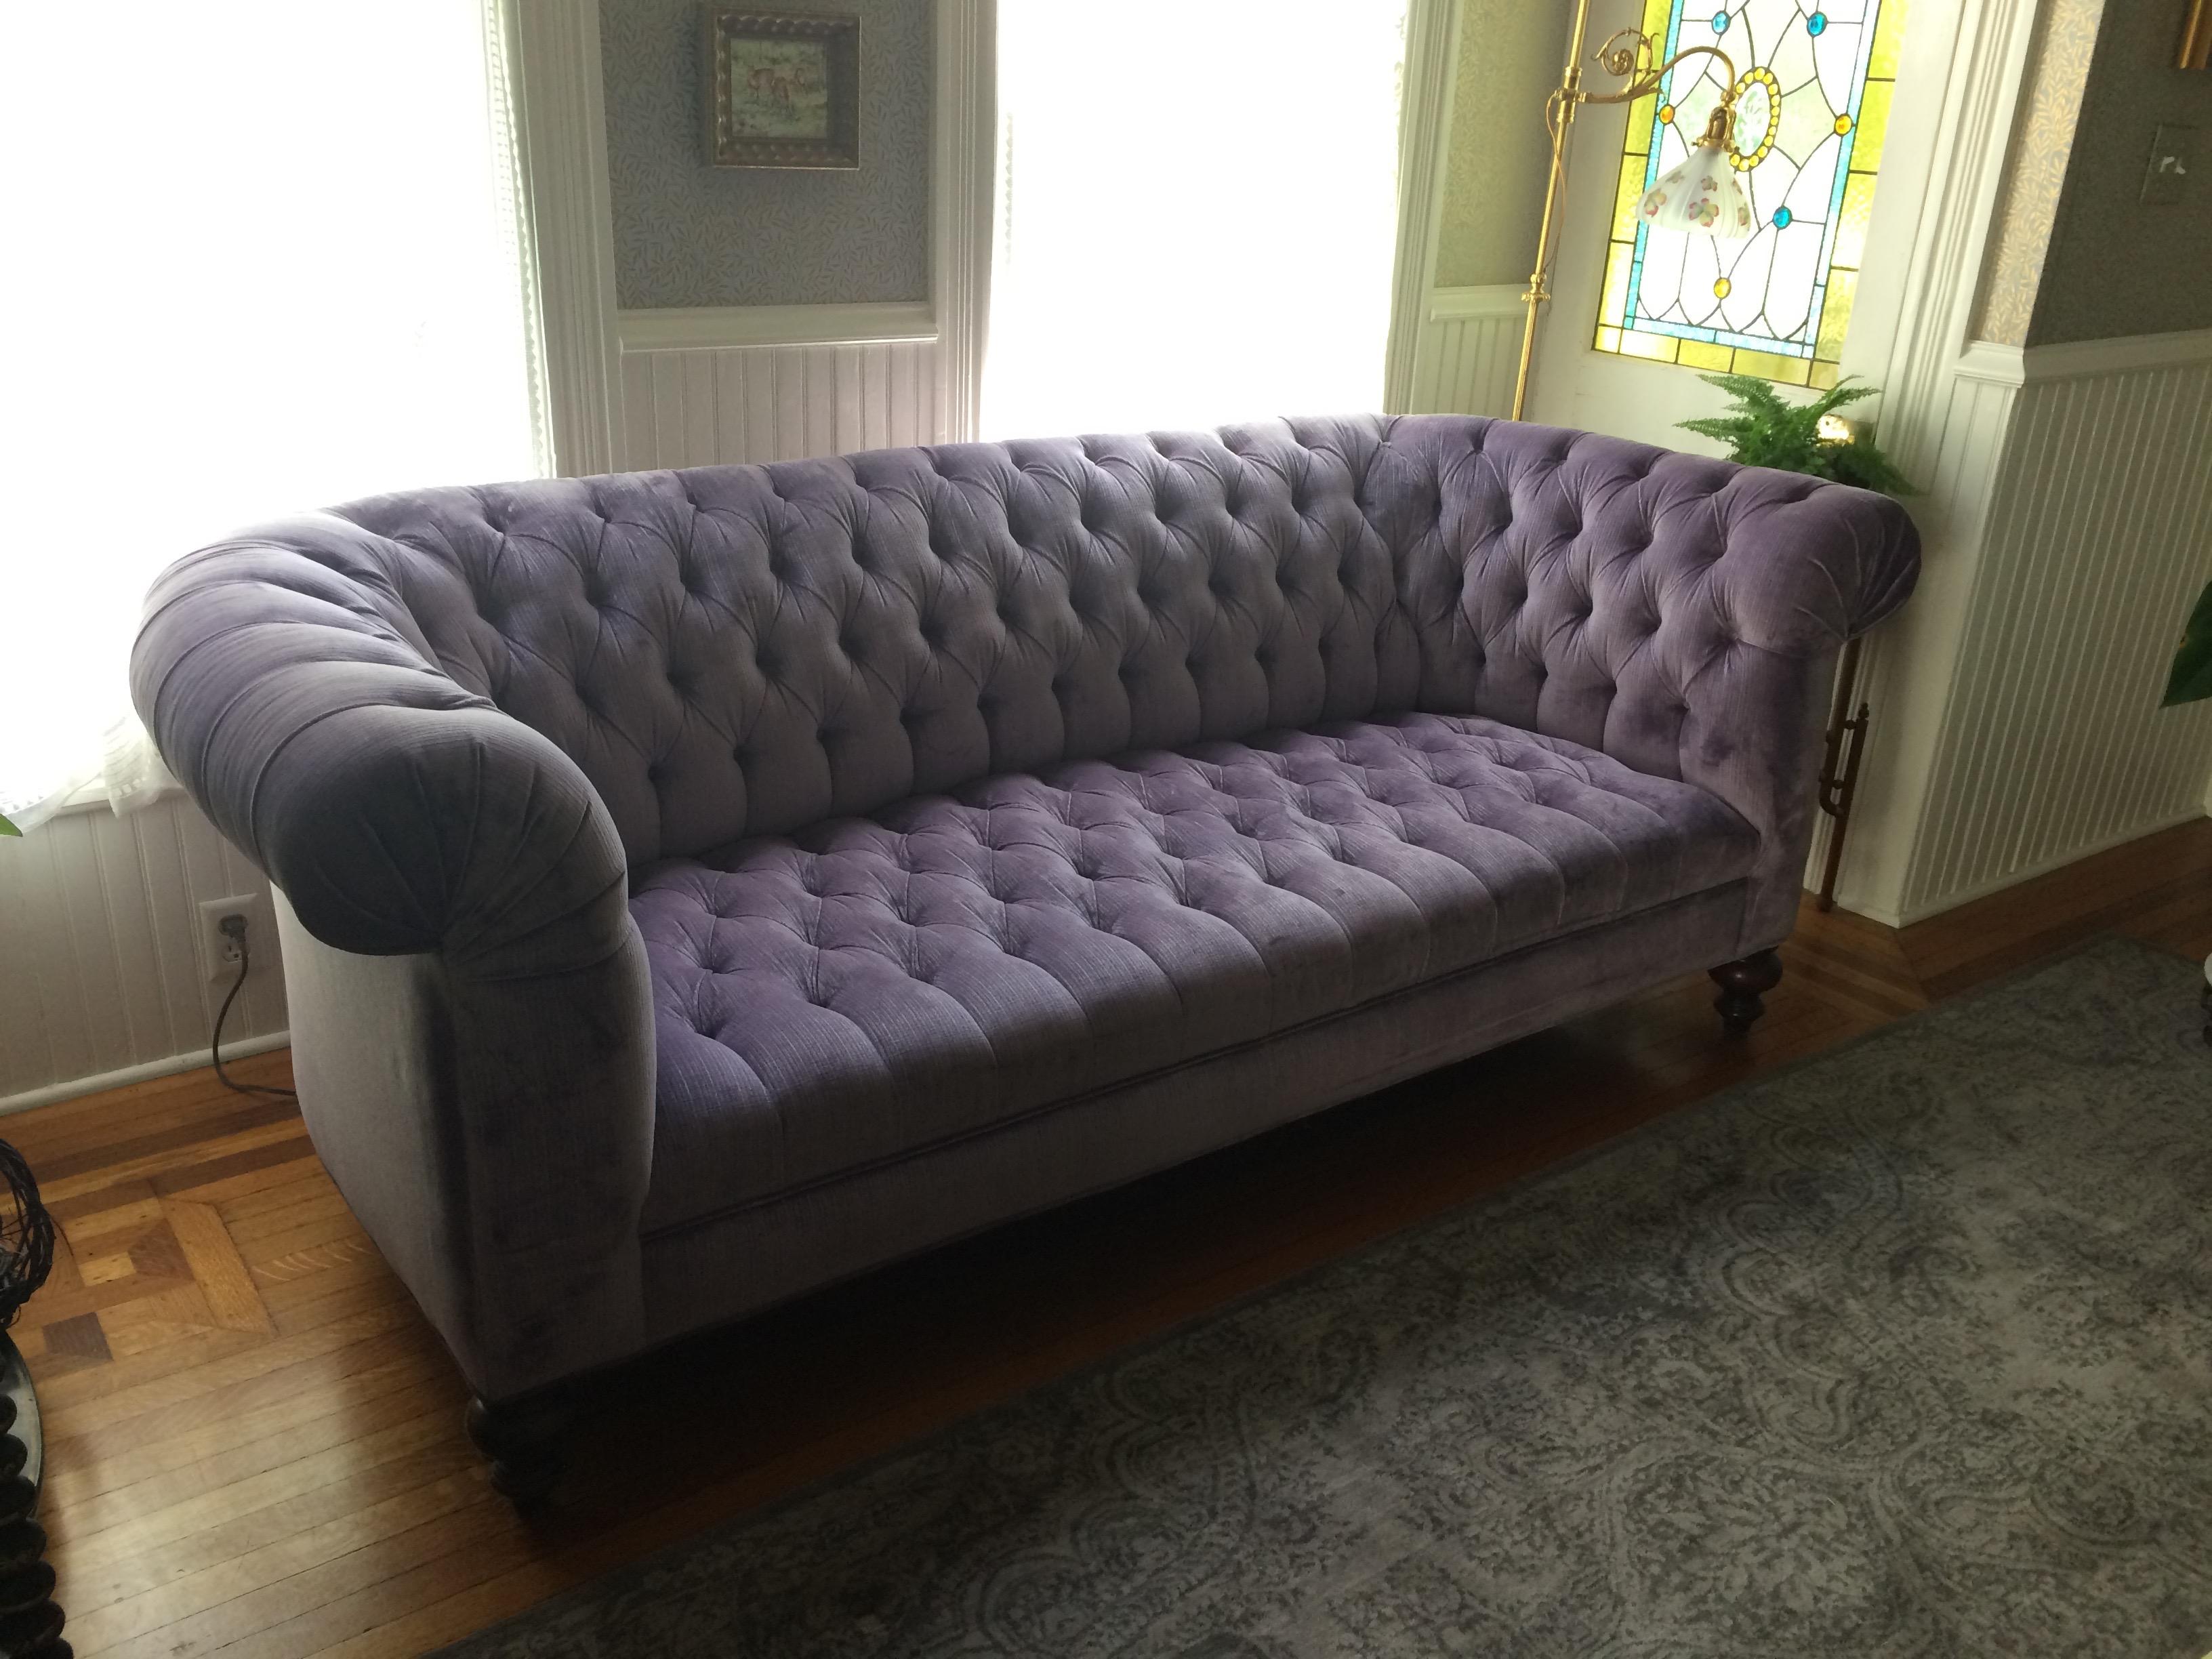 Super glamorous plush, top of the line, lavender velvet upholstered Chesterfield sofa, deep, soft, and having classic curved arms and walnut turned feet. About 5 years old.
Measures: Seat depth 22.5.